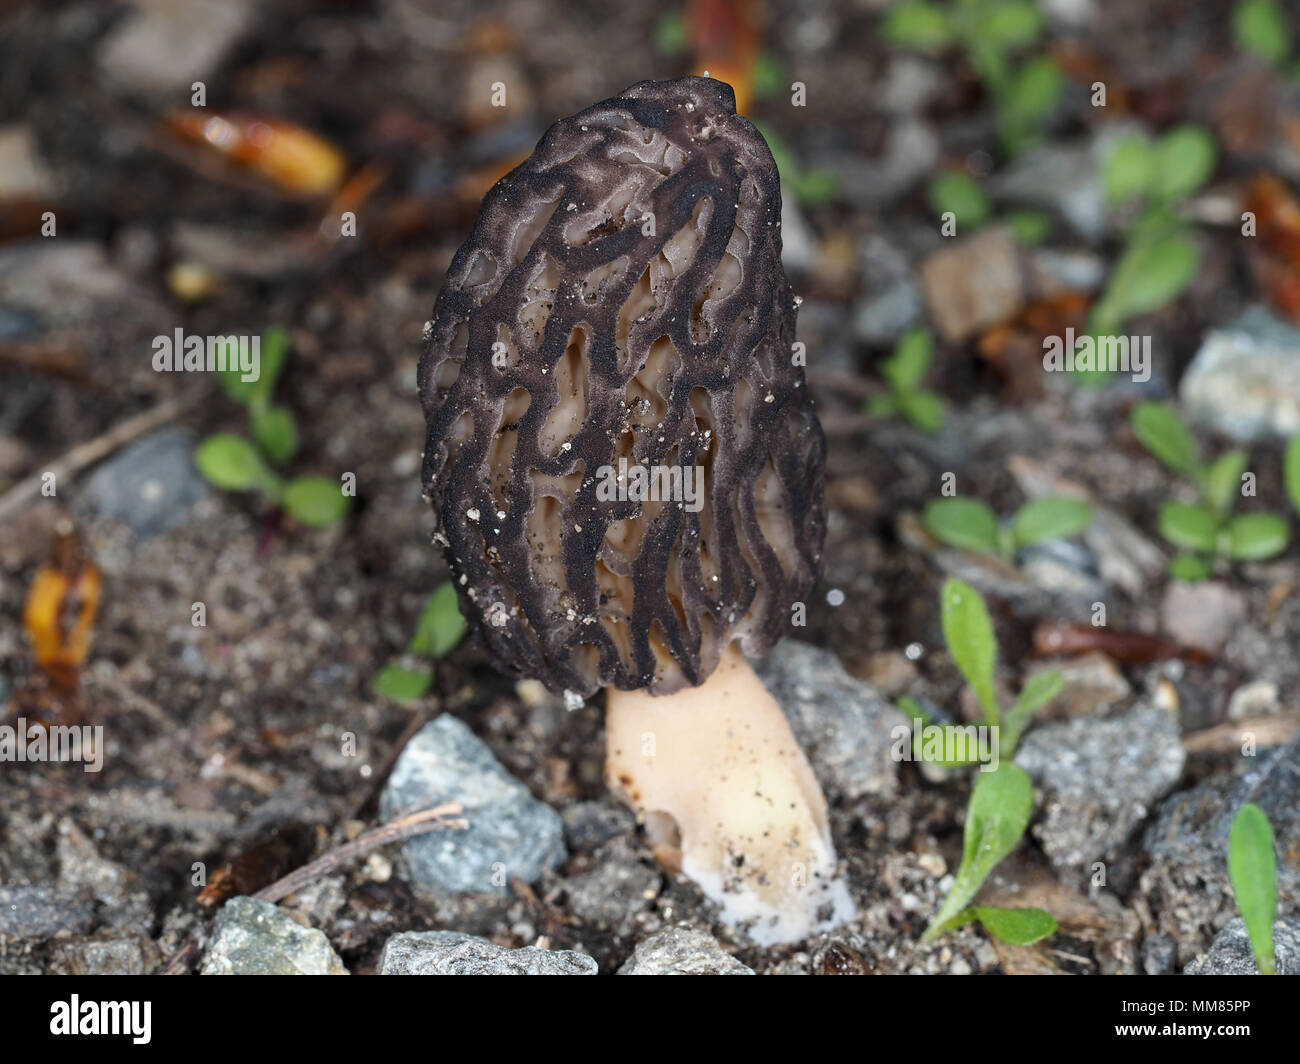 Wild black morel mushroom (most likely Morchella brunnea) growing in Central Washington state, USA Stock Photo